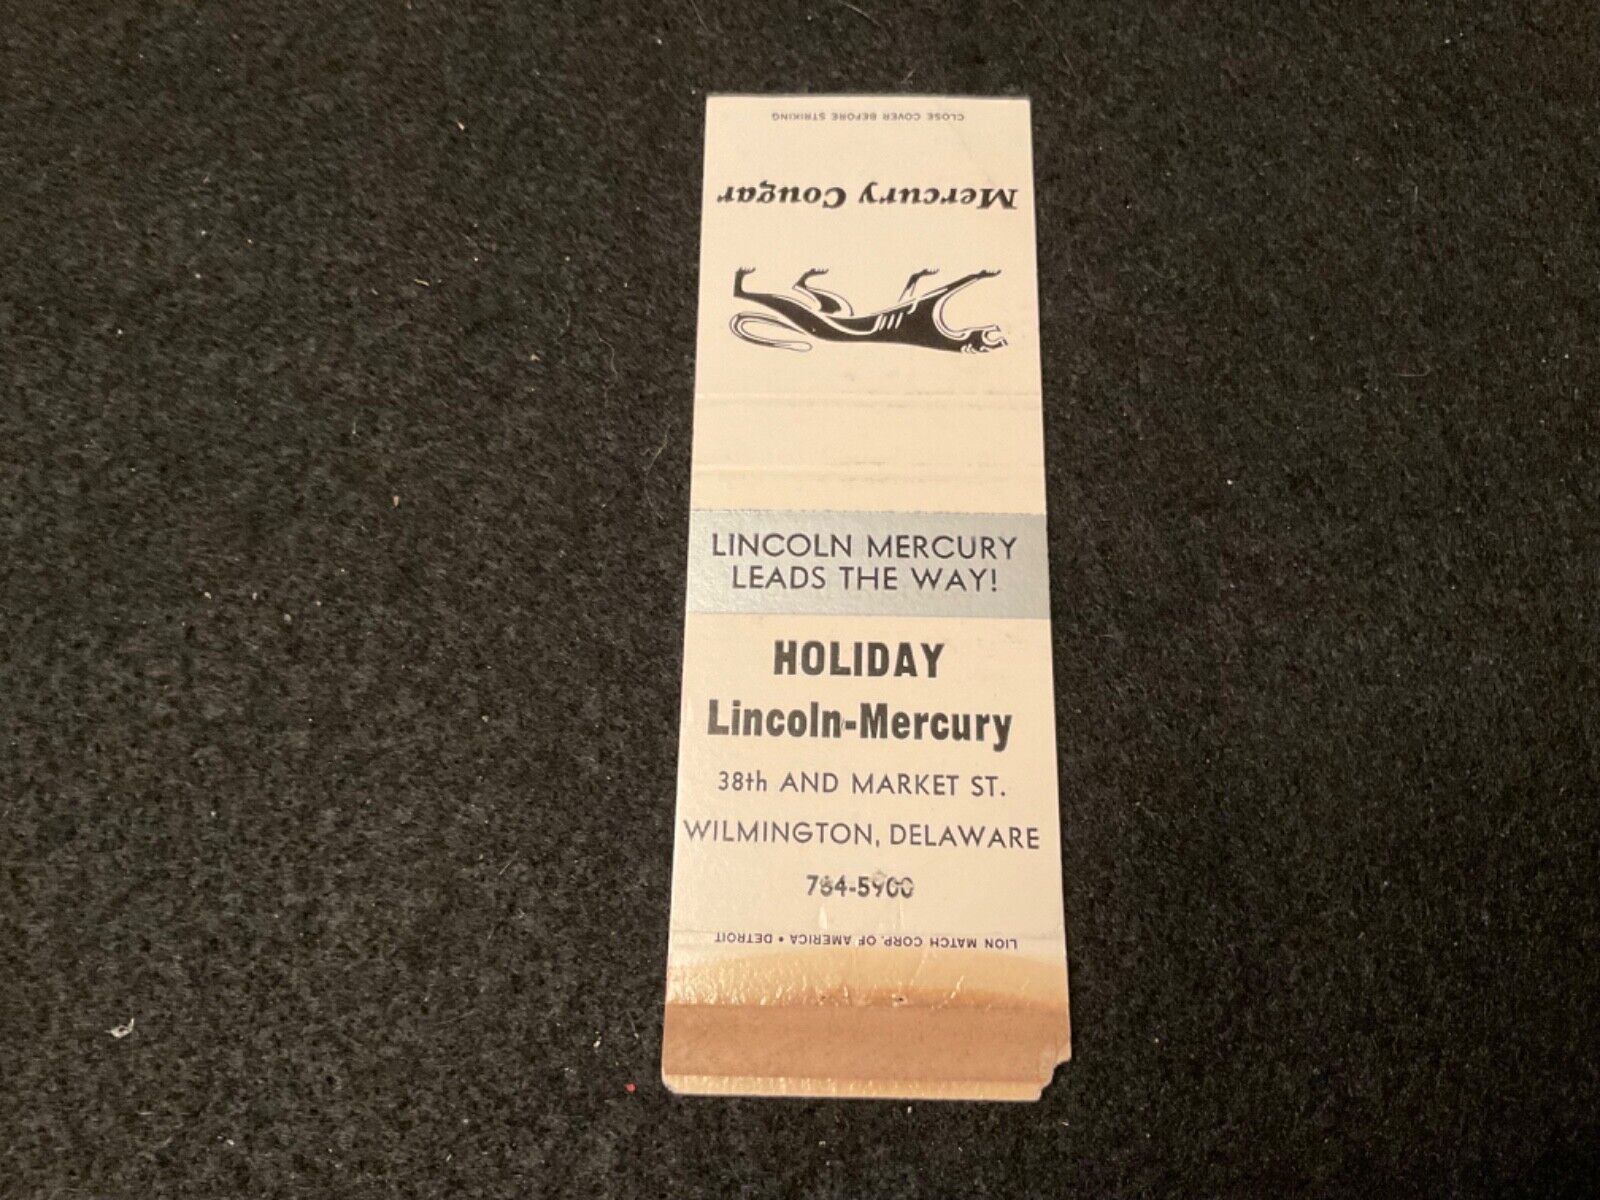 Mercury Cougar Holiday Lincoln-Mercury Wilmington Delaware Matchbook Cover